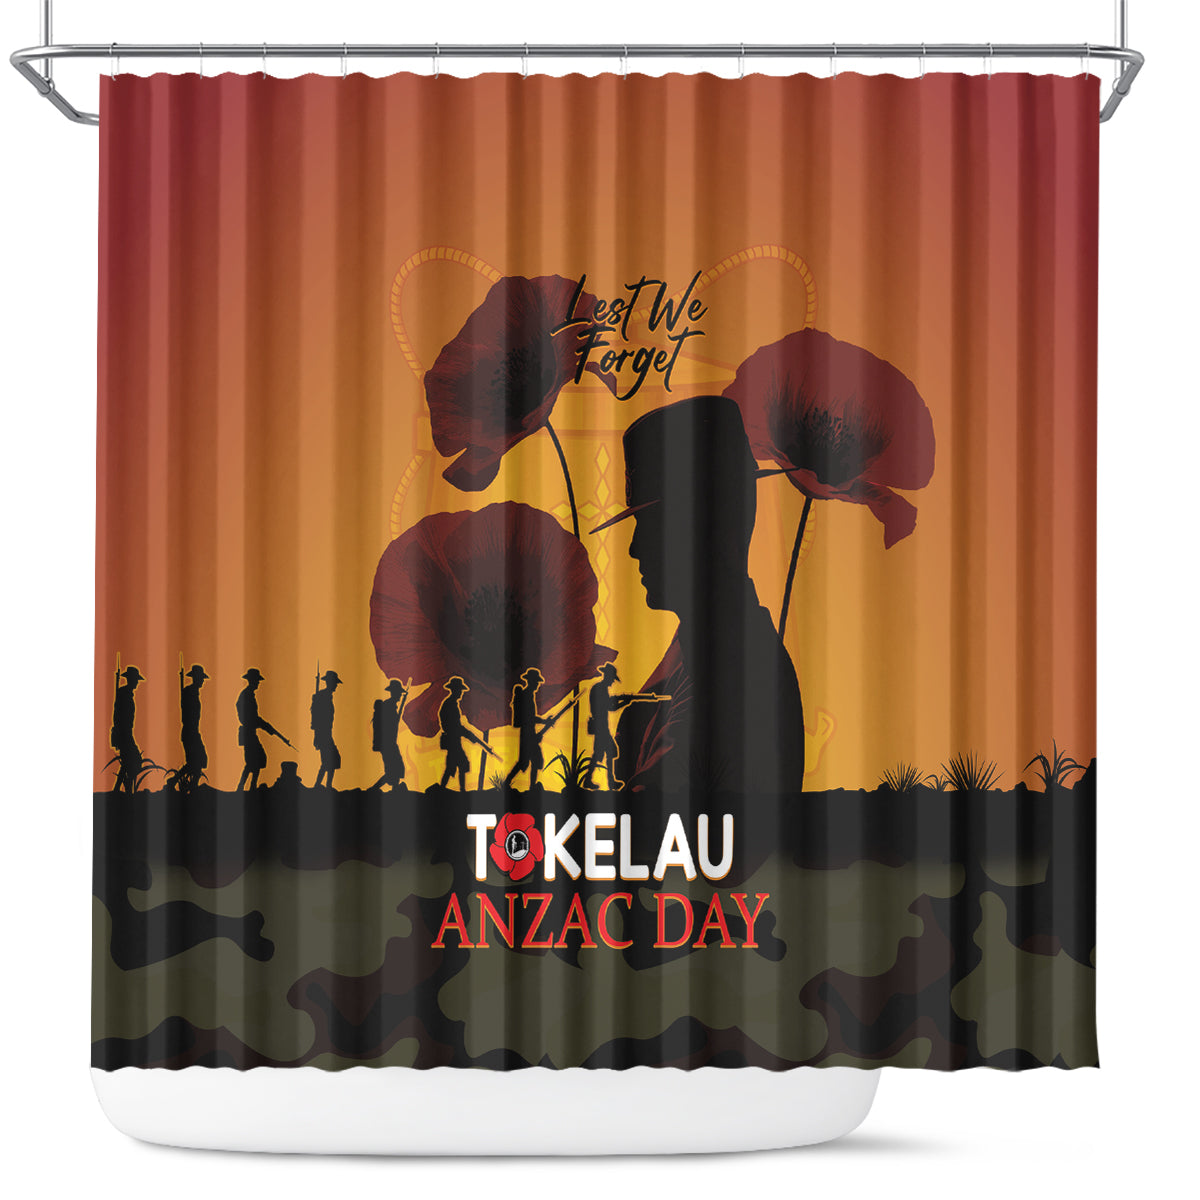 Tokelau ANZAC Day Shower Curtain Camouflage With Poppies Lest We Forget LT14 Yellow - Polynesian Pride